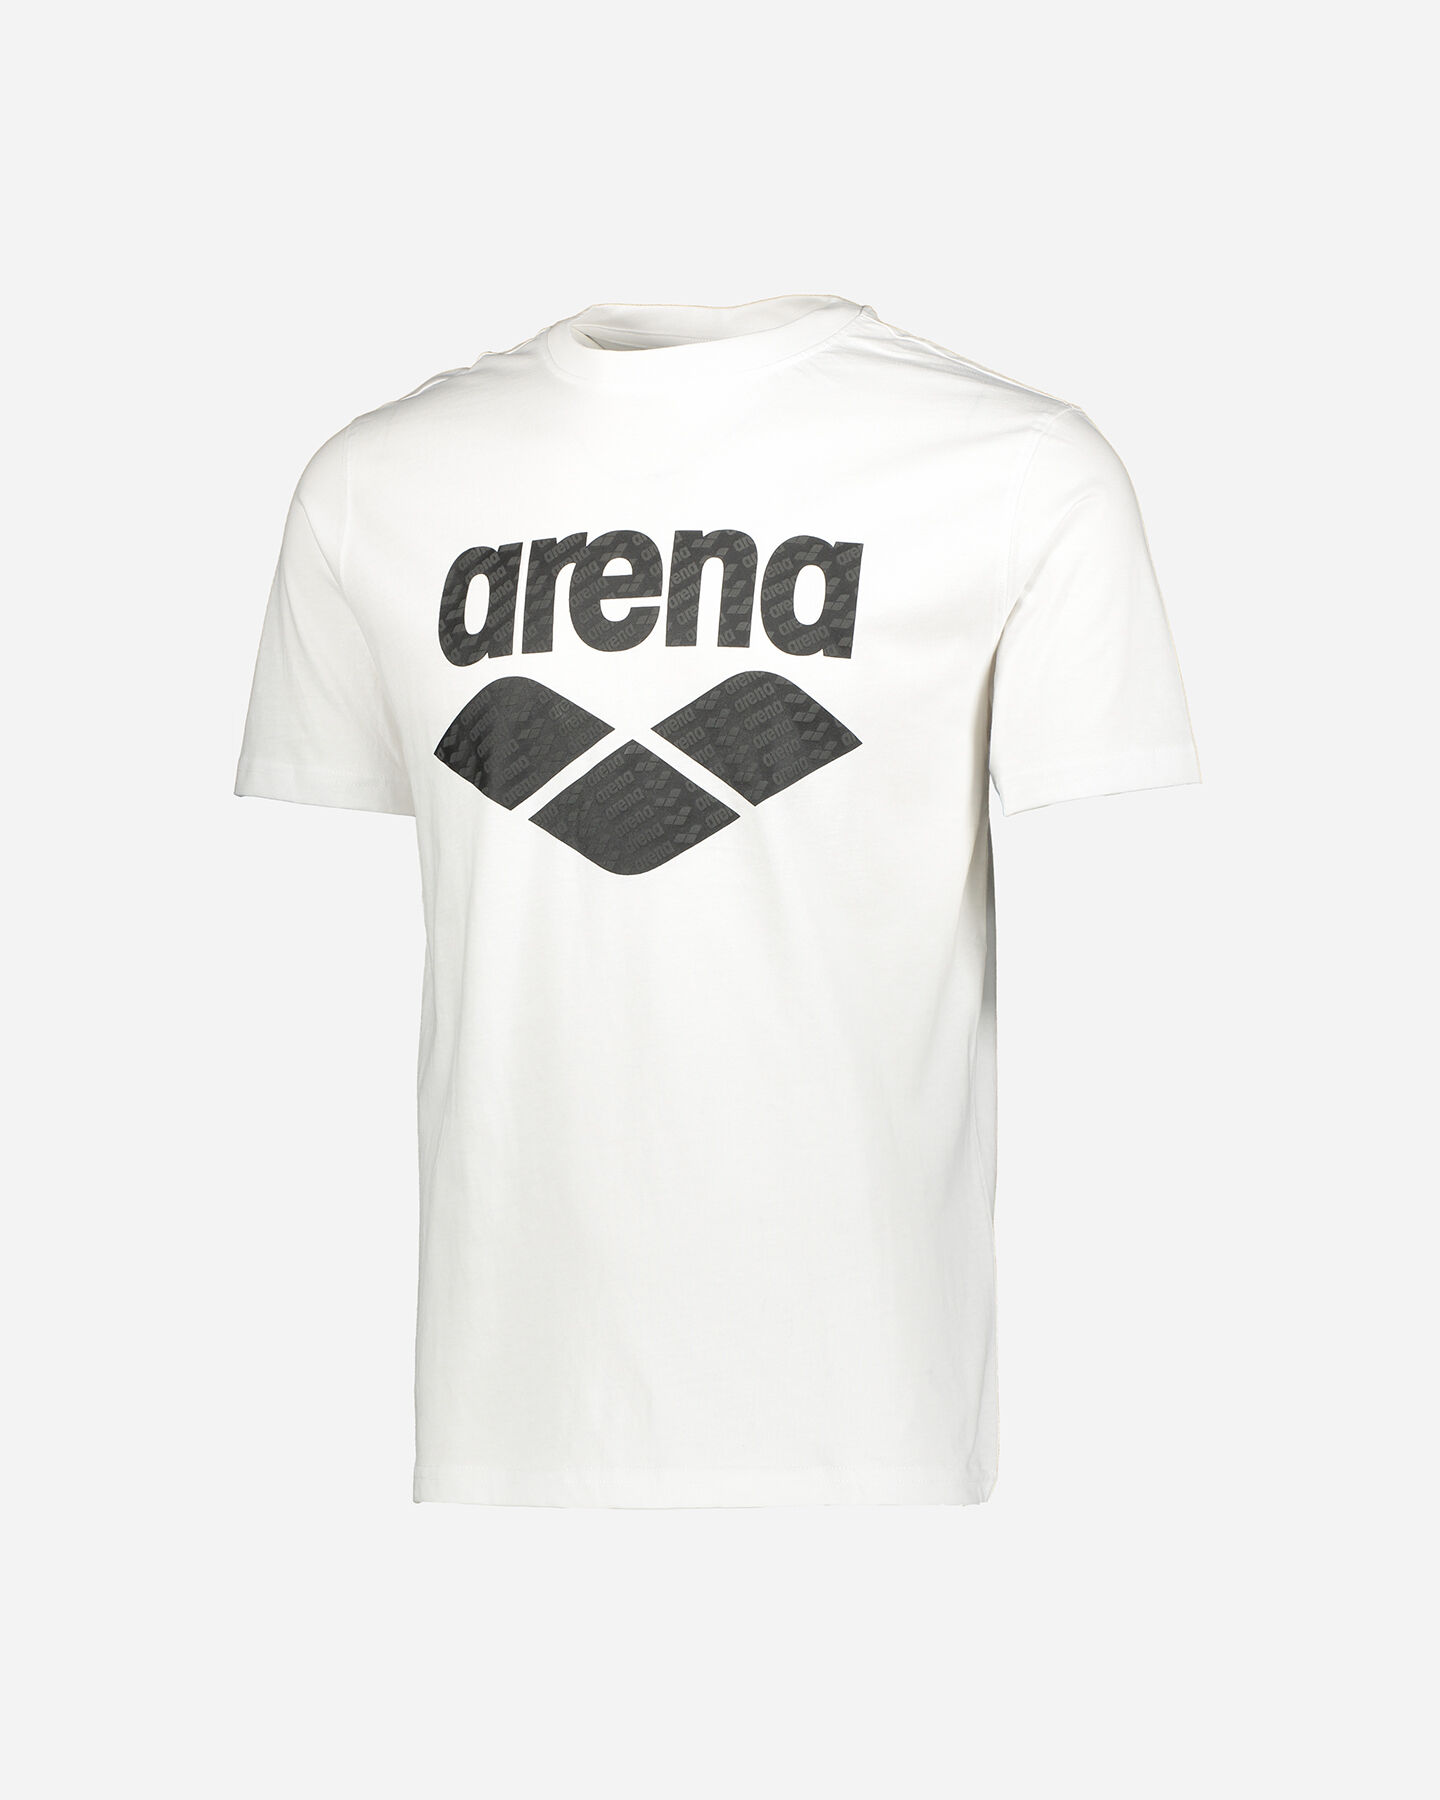  T-Shirt ARENA BIG LOGO PRINTED M S4087151|001|XS scatto 5